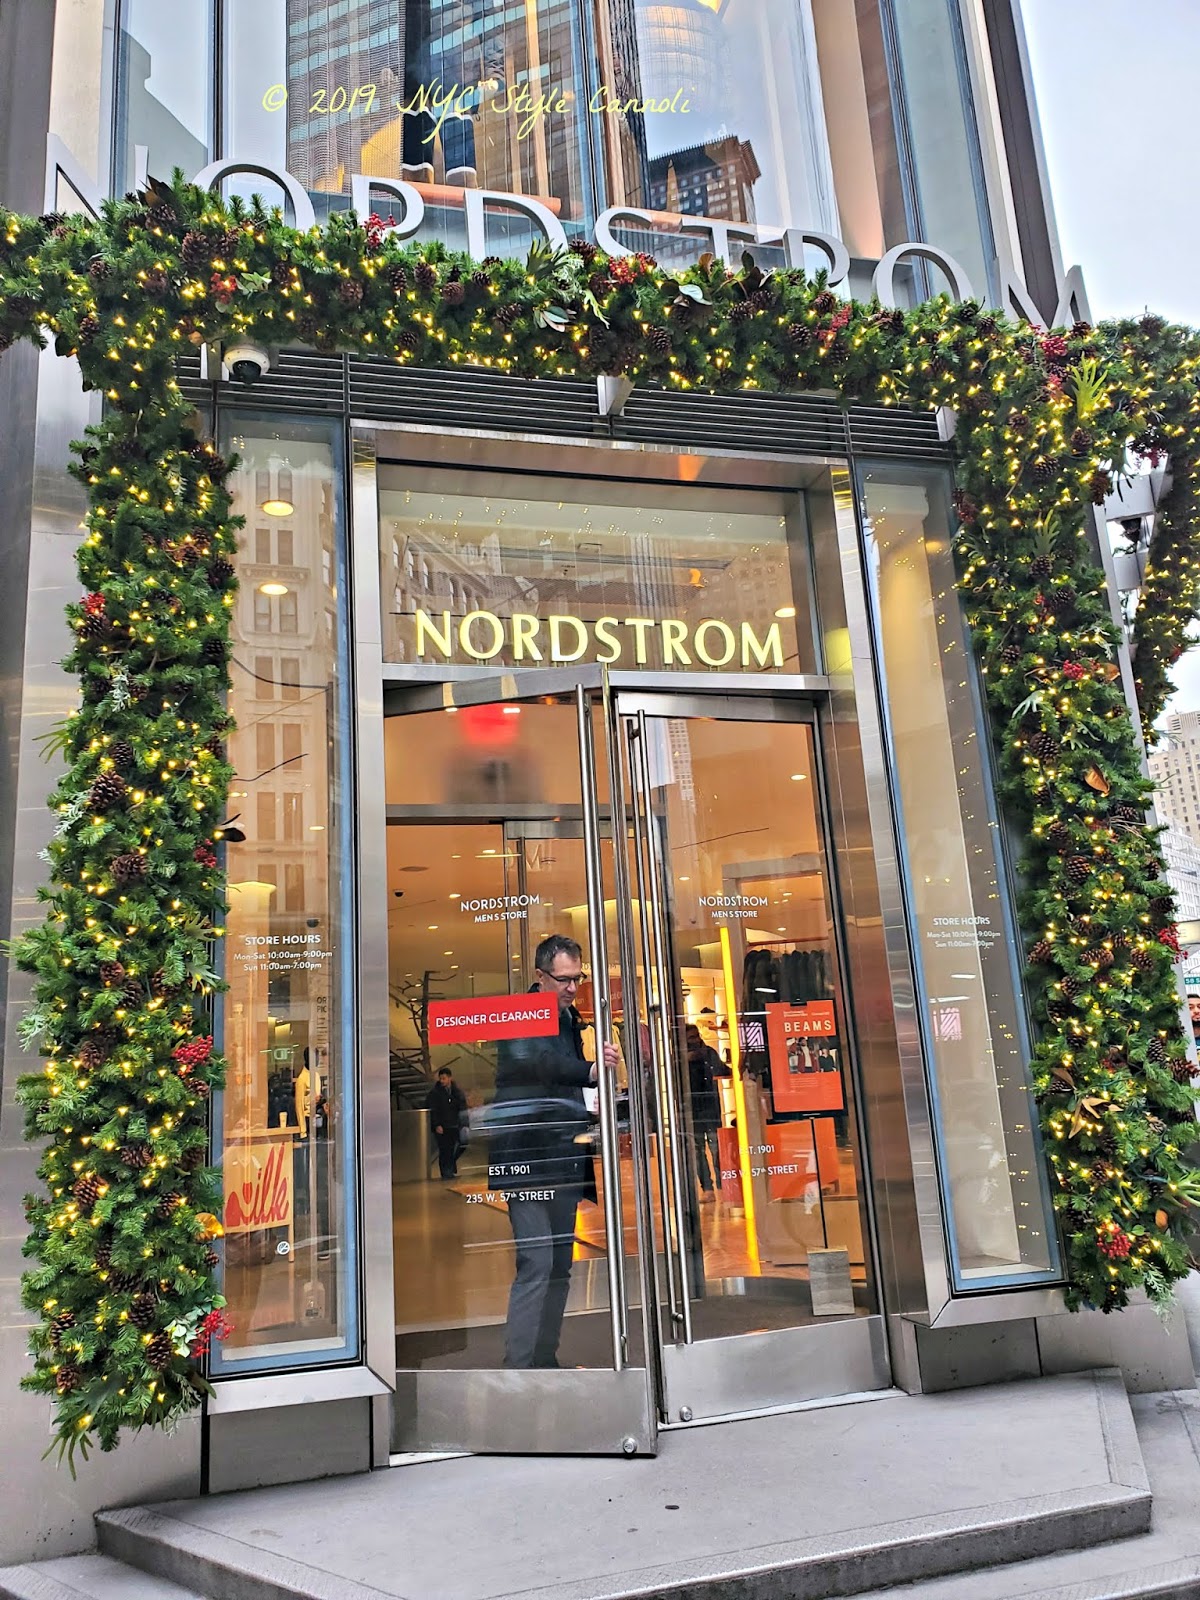 NYC, Style & a little Cannoli: Nordstrom 57th Street New York City